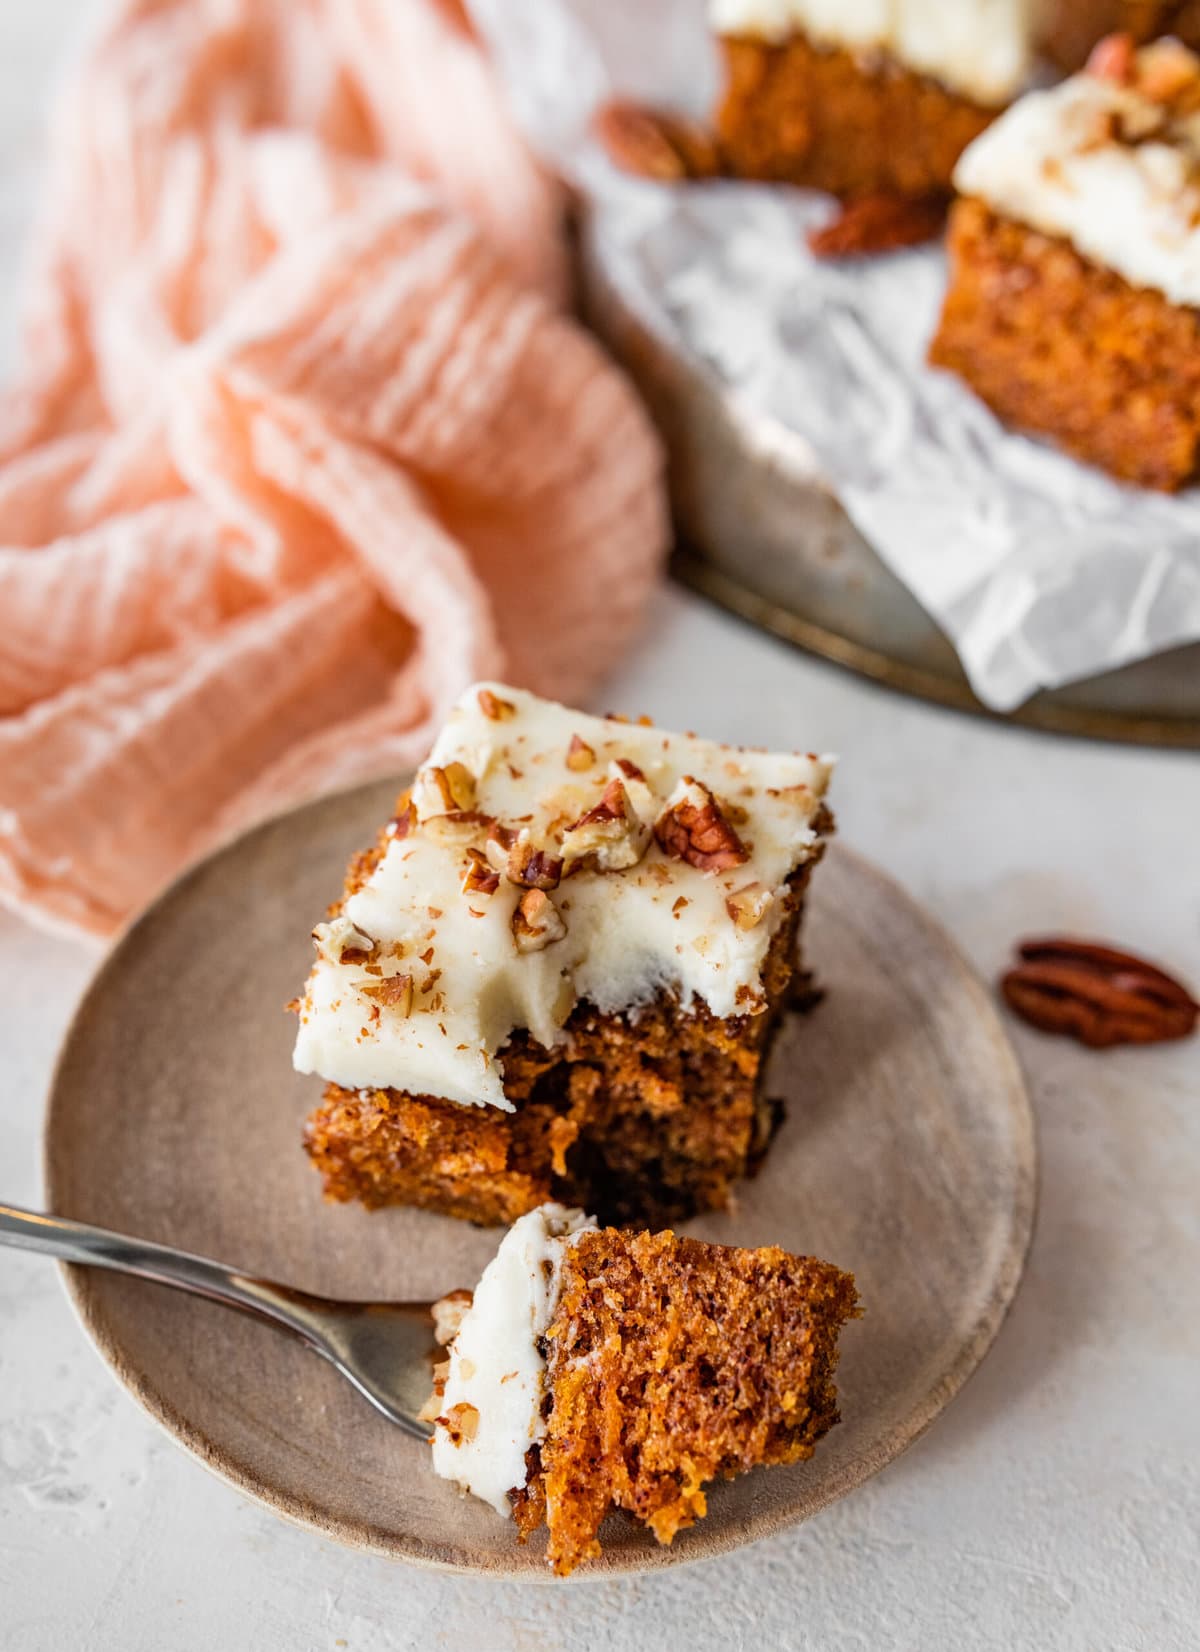 a square slice of carrot cake with cream cheese frosting on a plate. bite taken out of the cake with a fork.